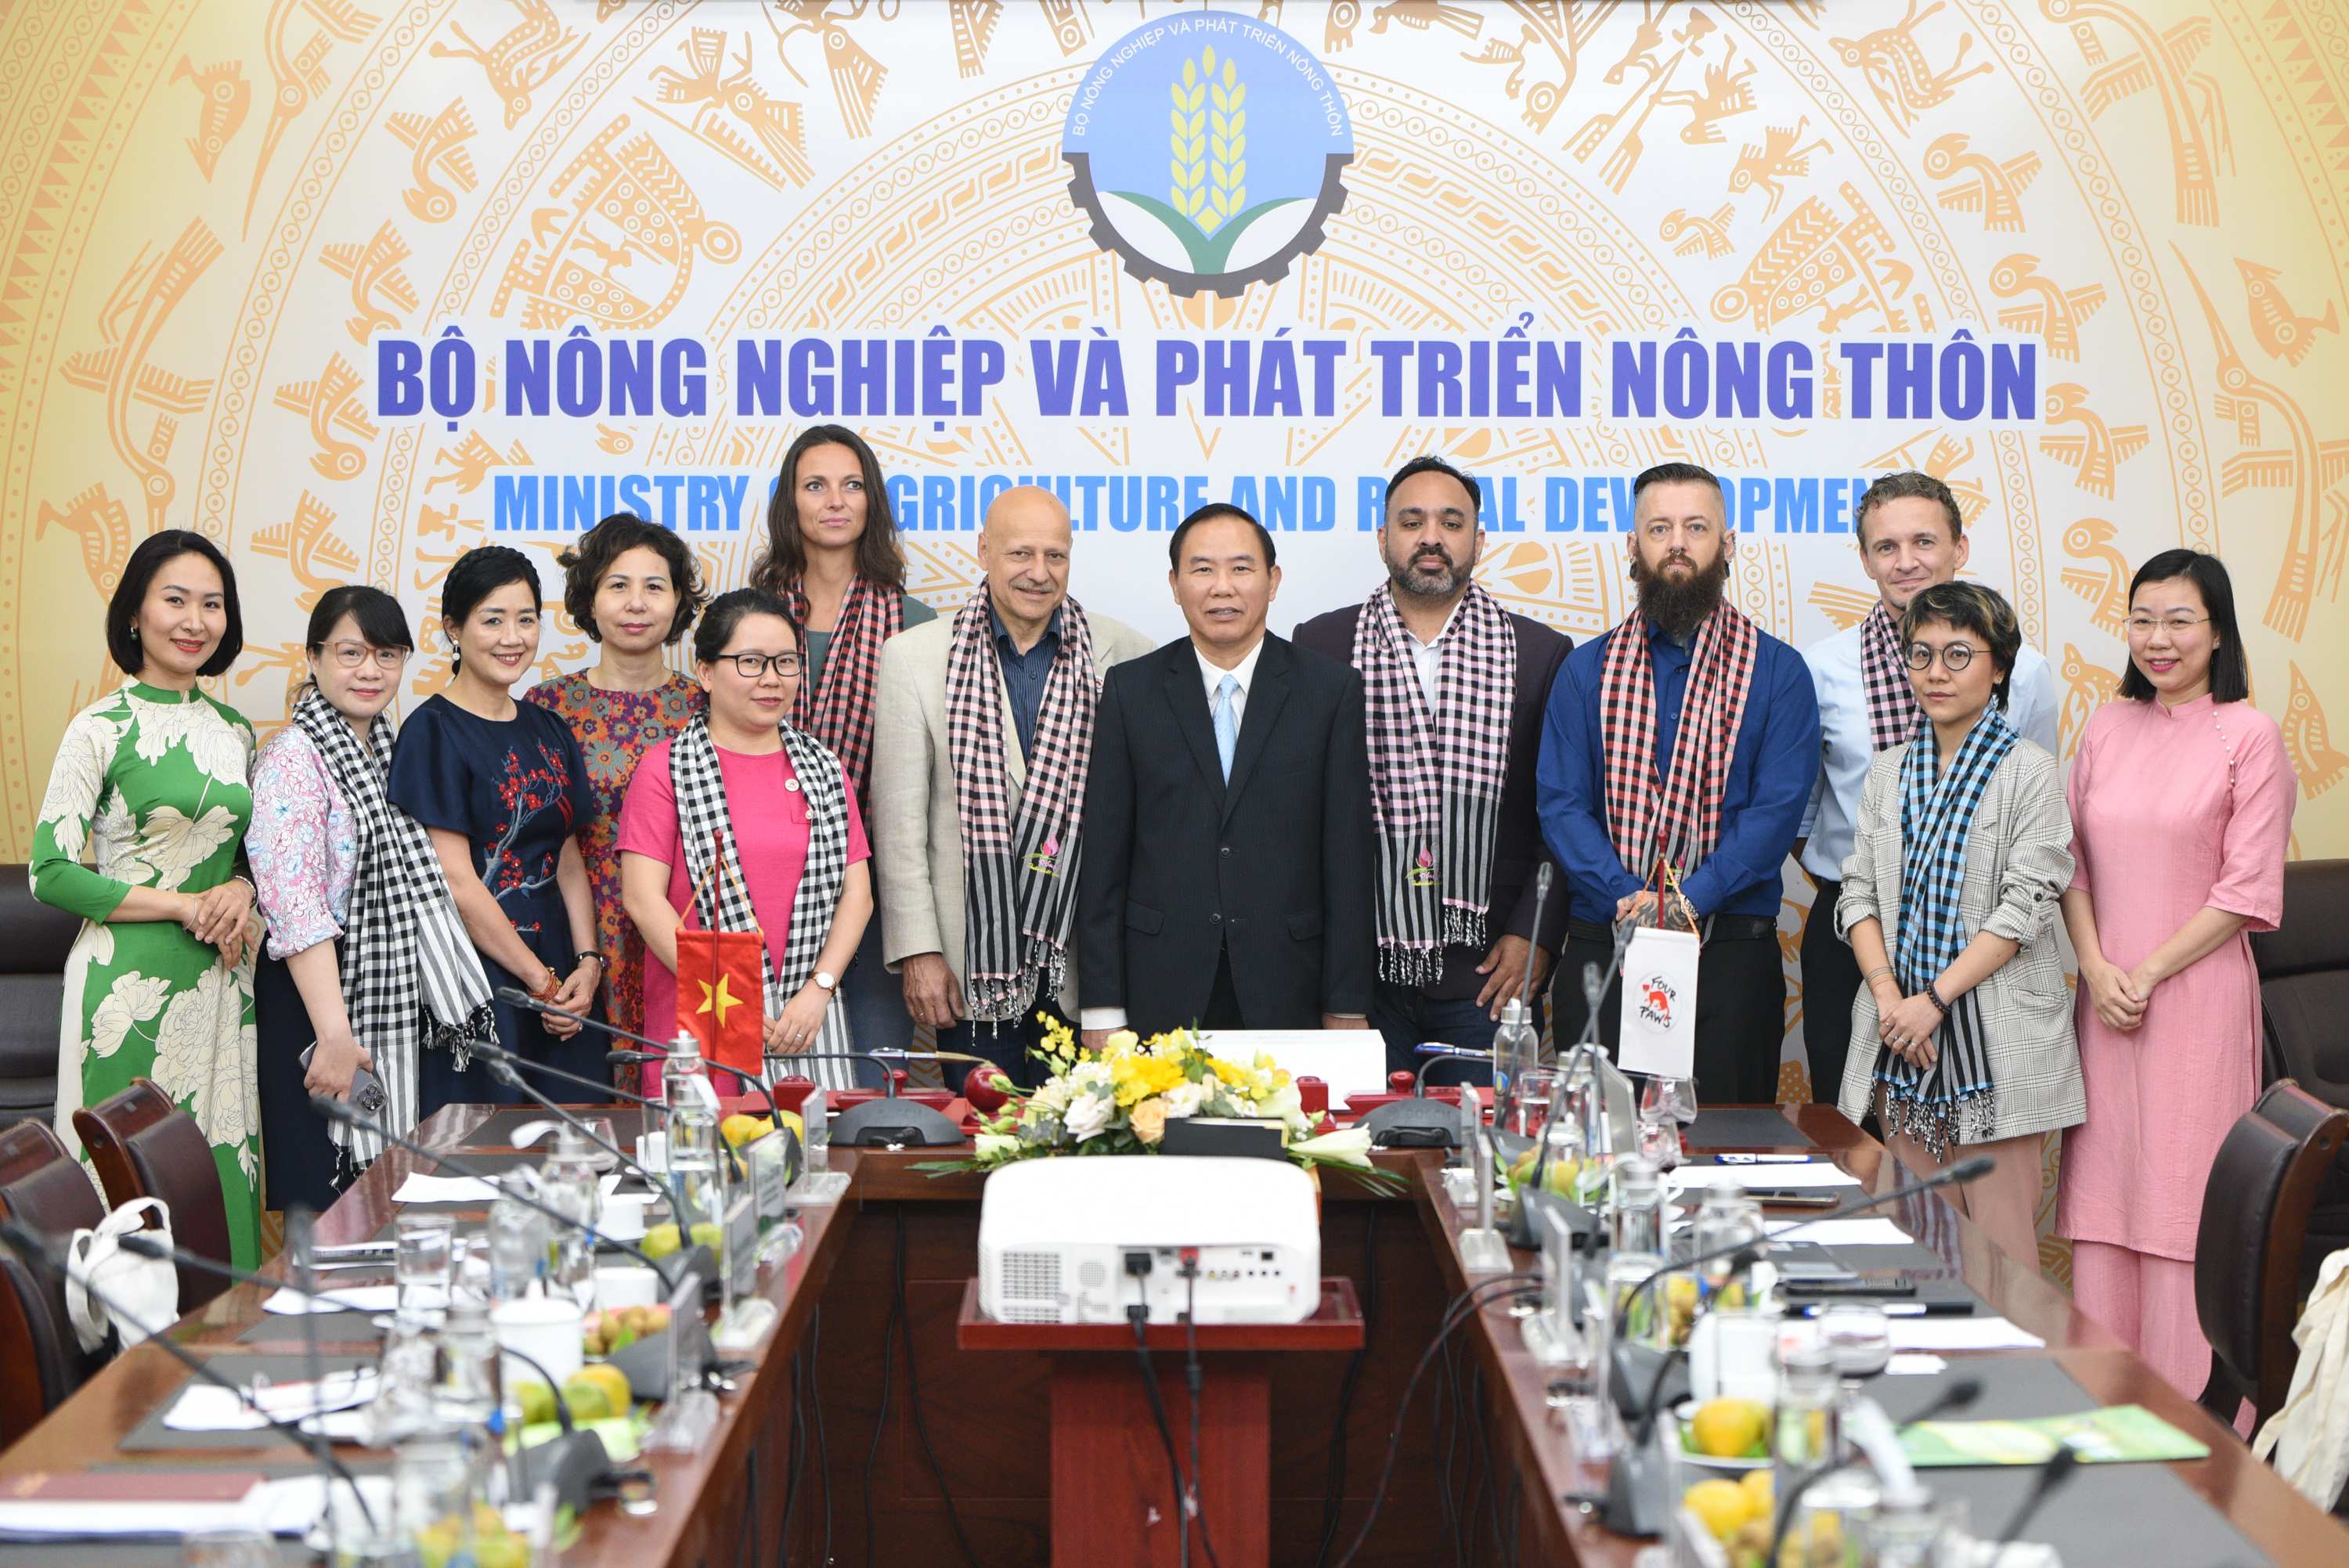 FOUR PAWS International is the first animal welfare organization to join the Vietnam One Health partnership framework. Photo: Tung Dinh.